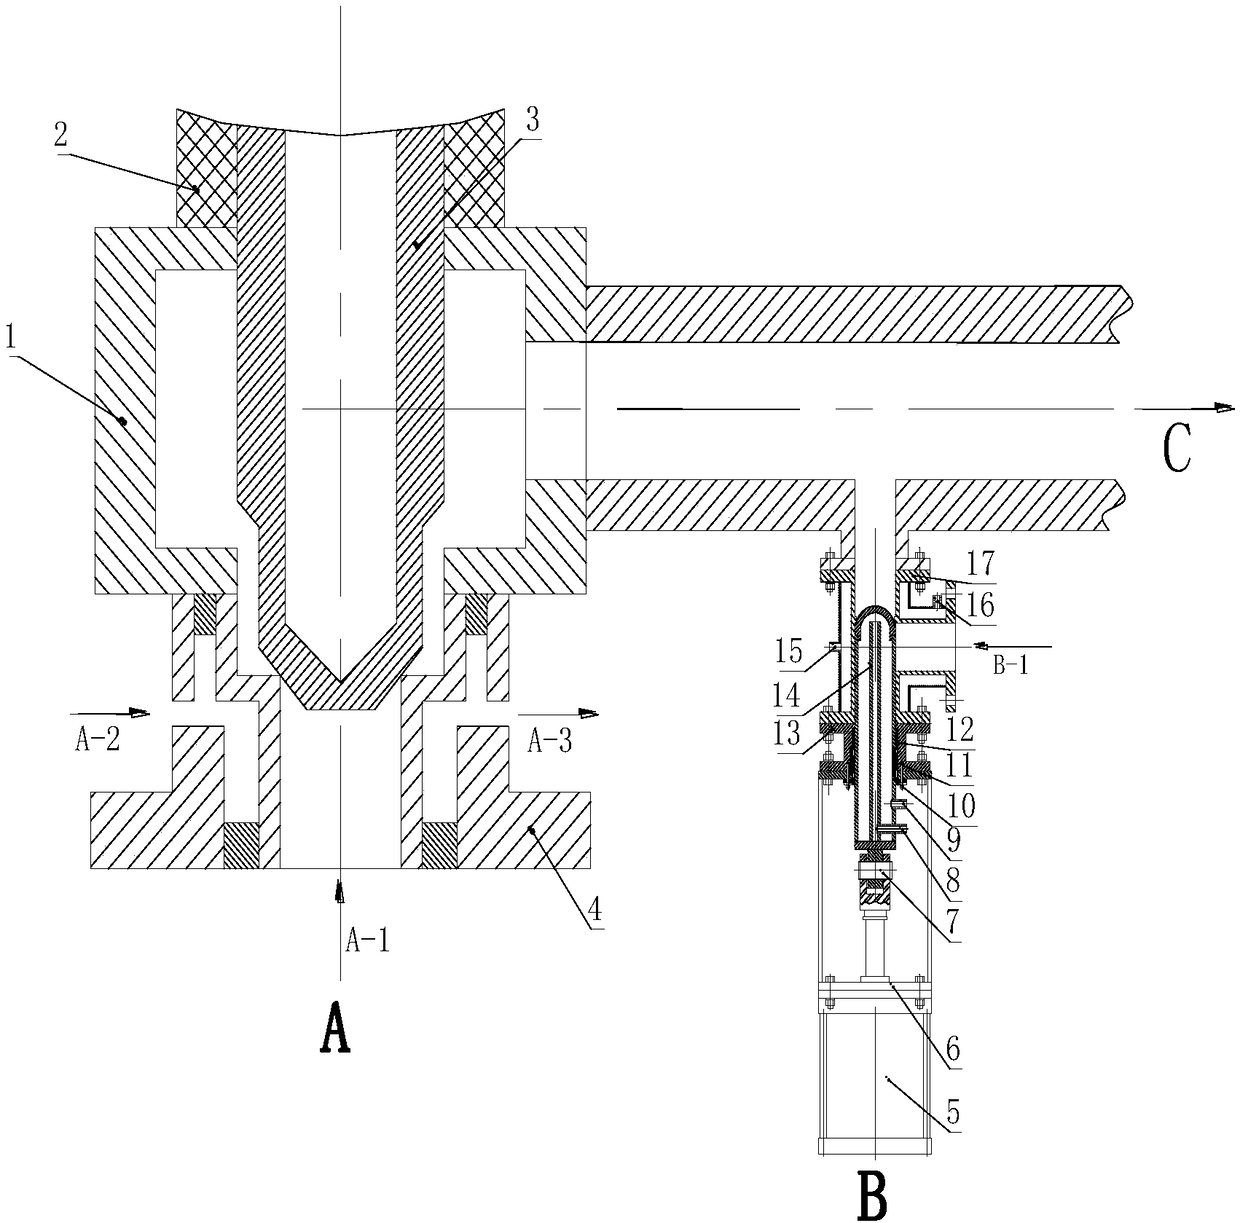 Protection system of high-temperature and high-pressure valve